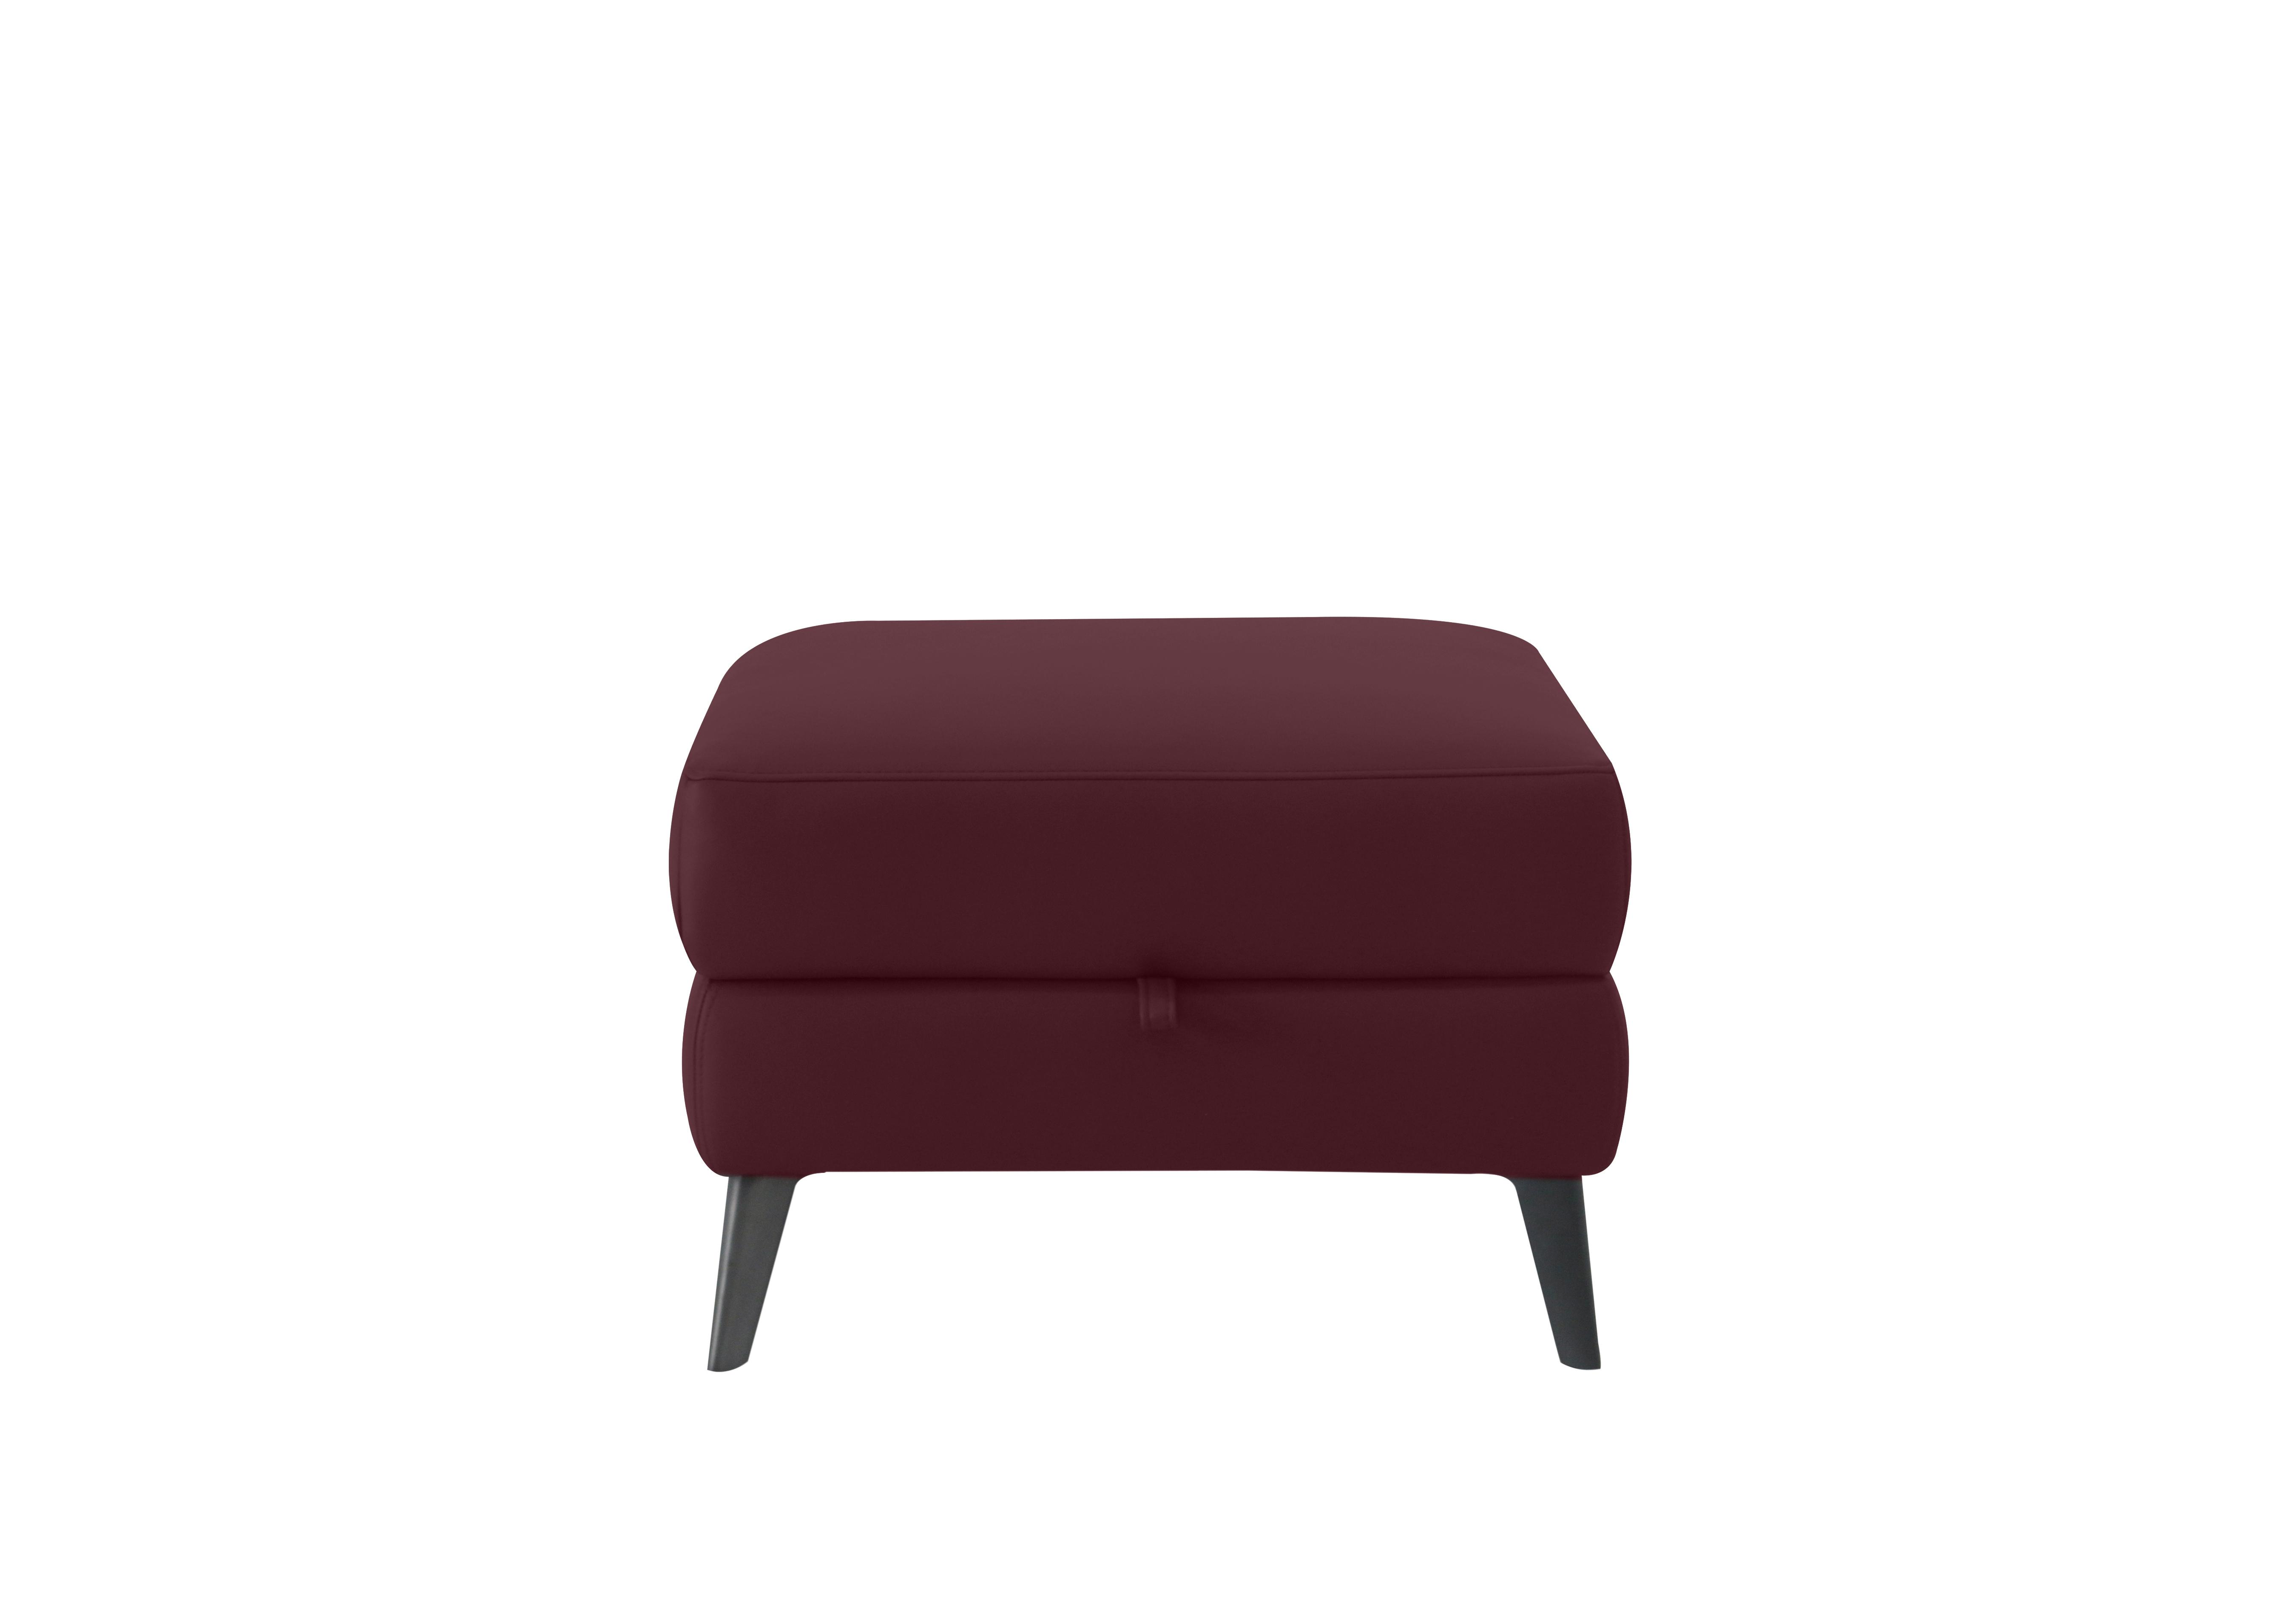 Huxley Leather Storage Footstool in Np-549e Ruby on Furniture Village